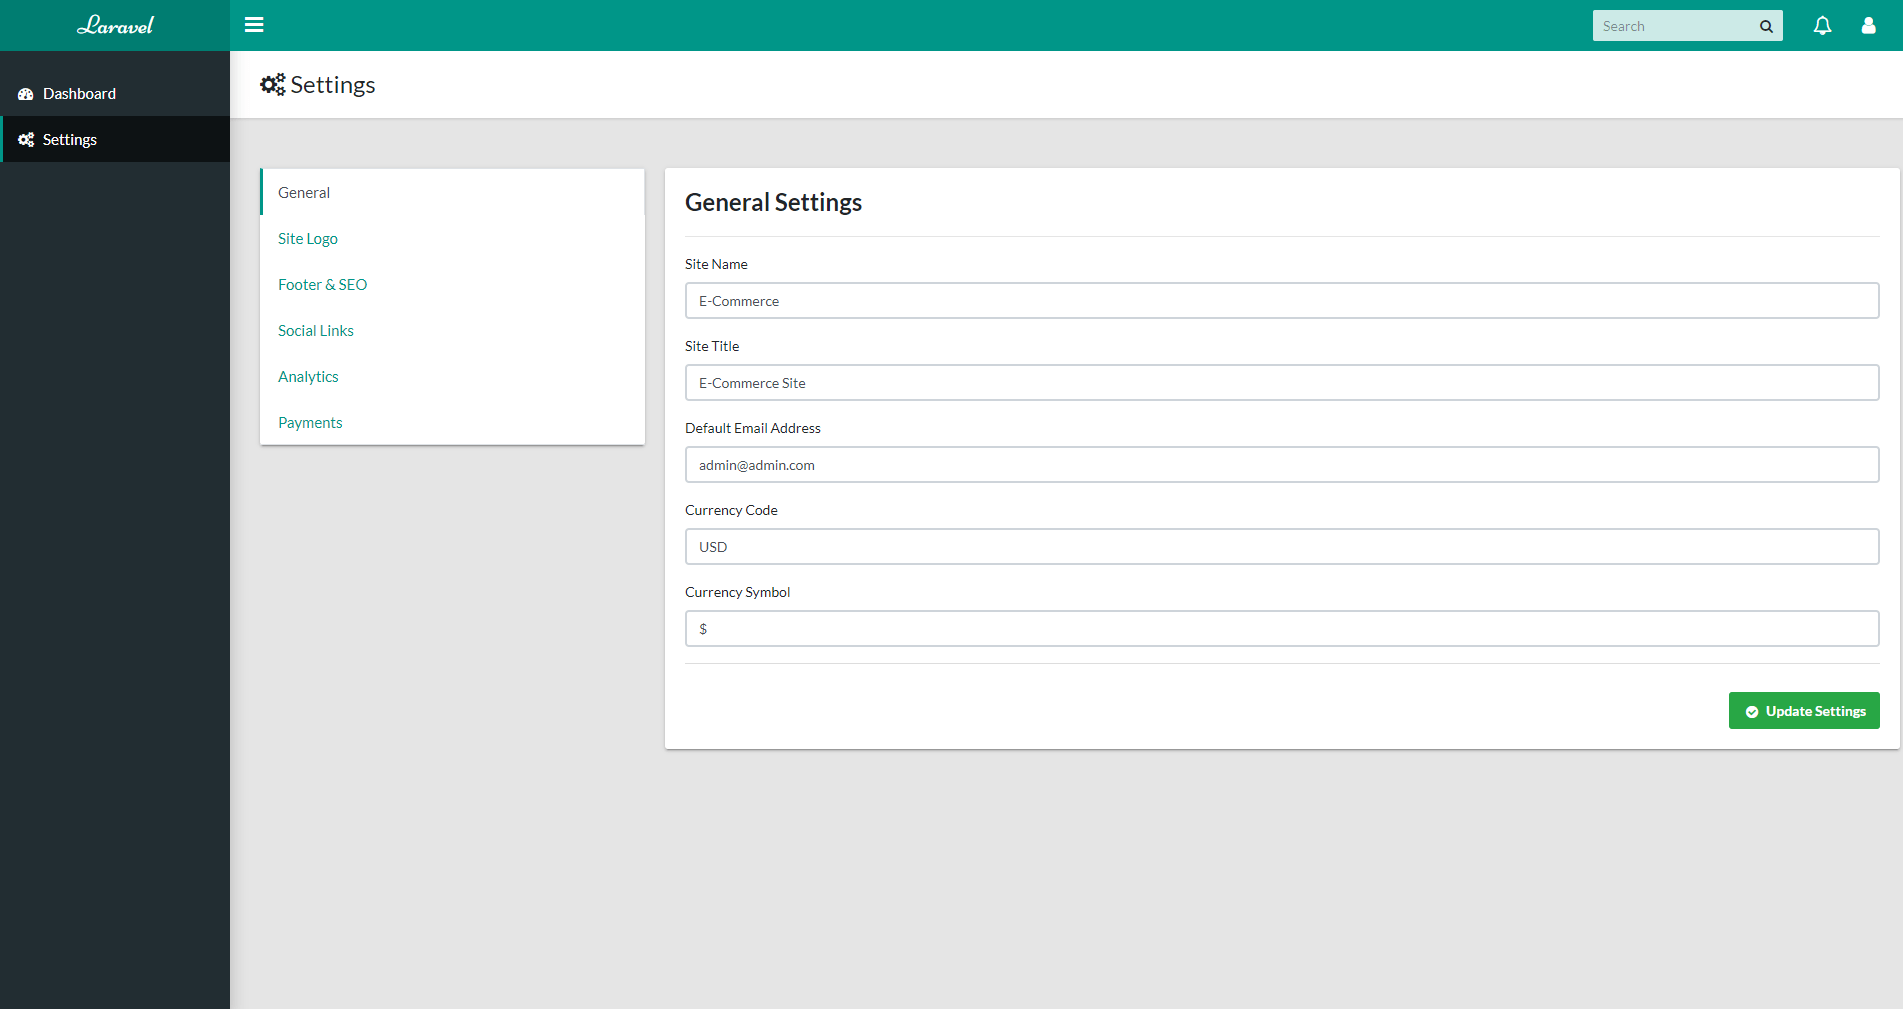 Settings Section - General